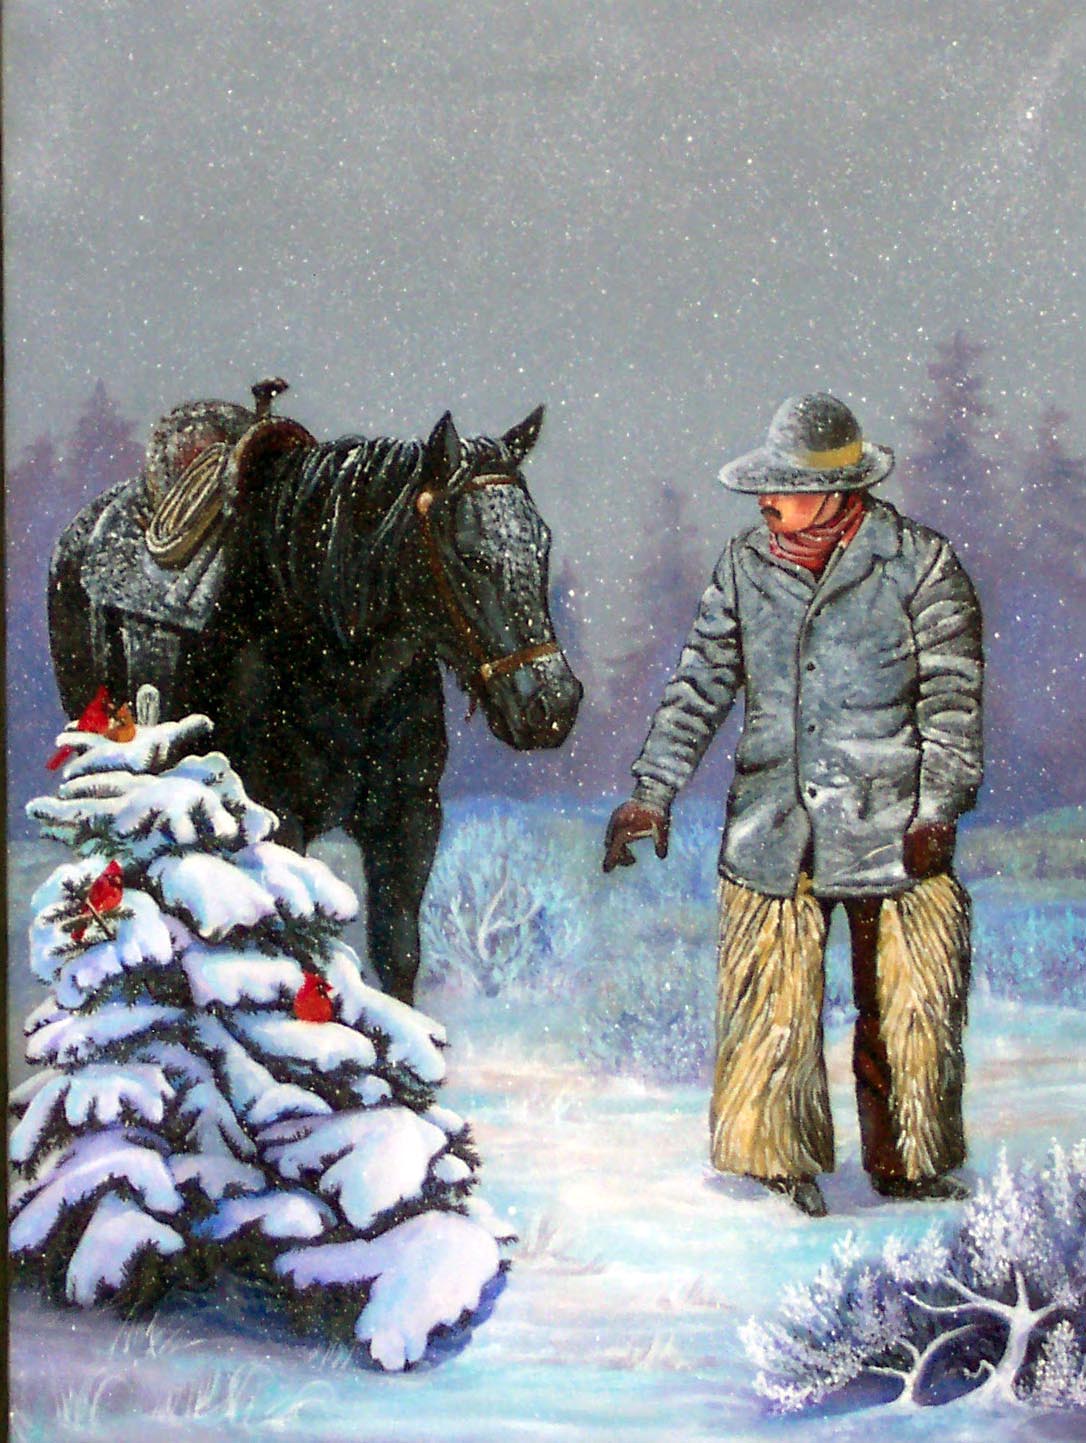 Cowboy Christmas Image Pictures Original Updated